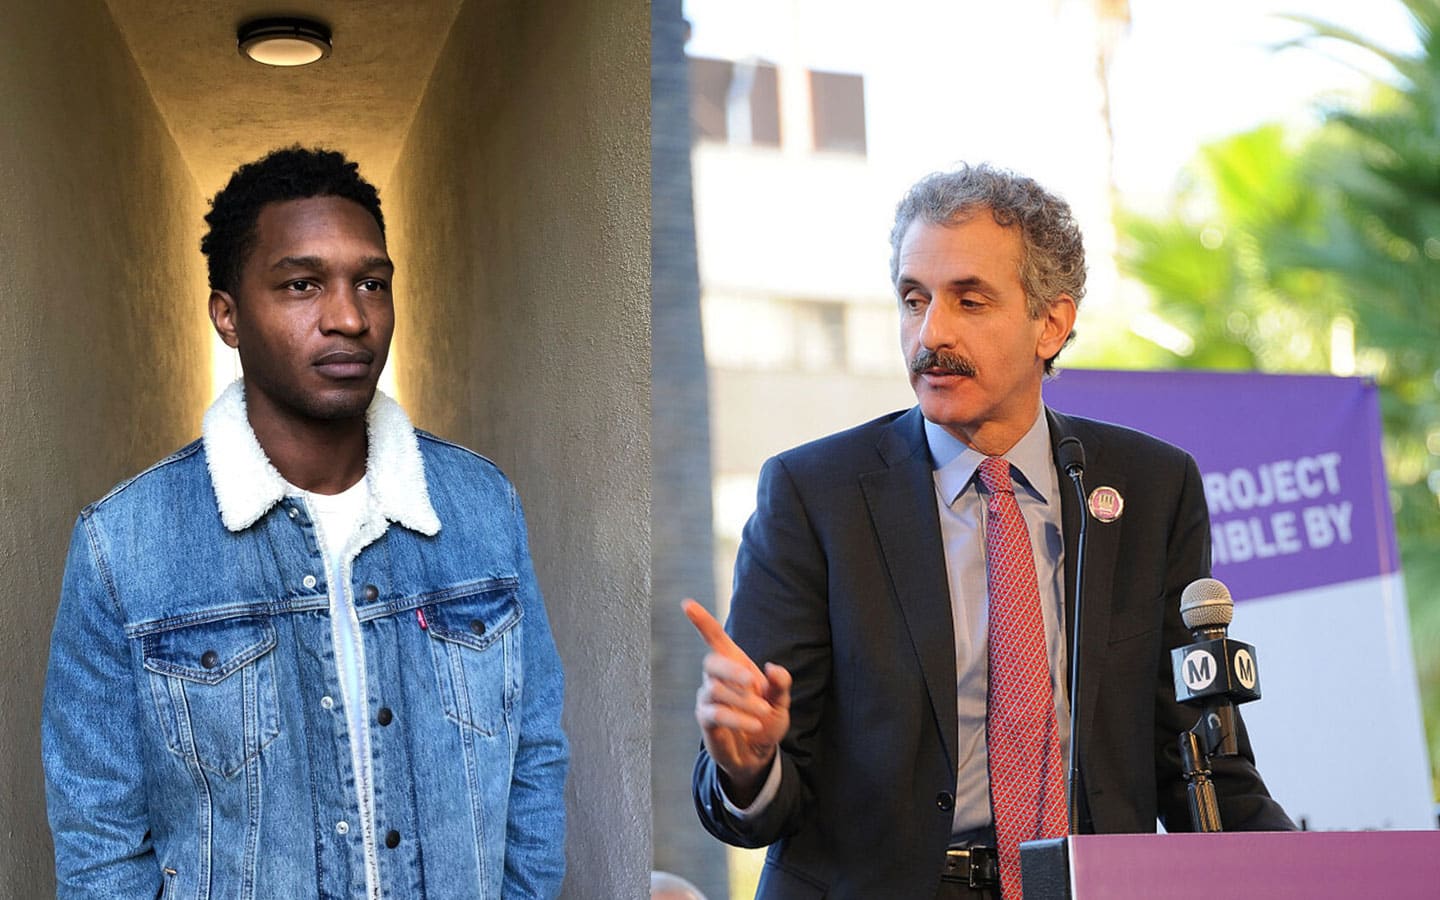 Antwon Jones and Mike Feuer